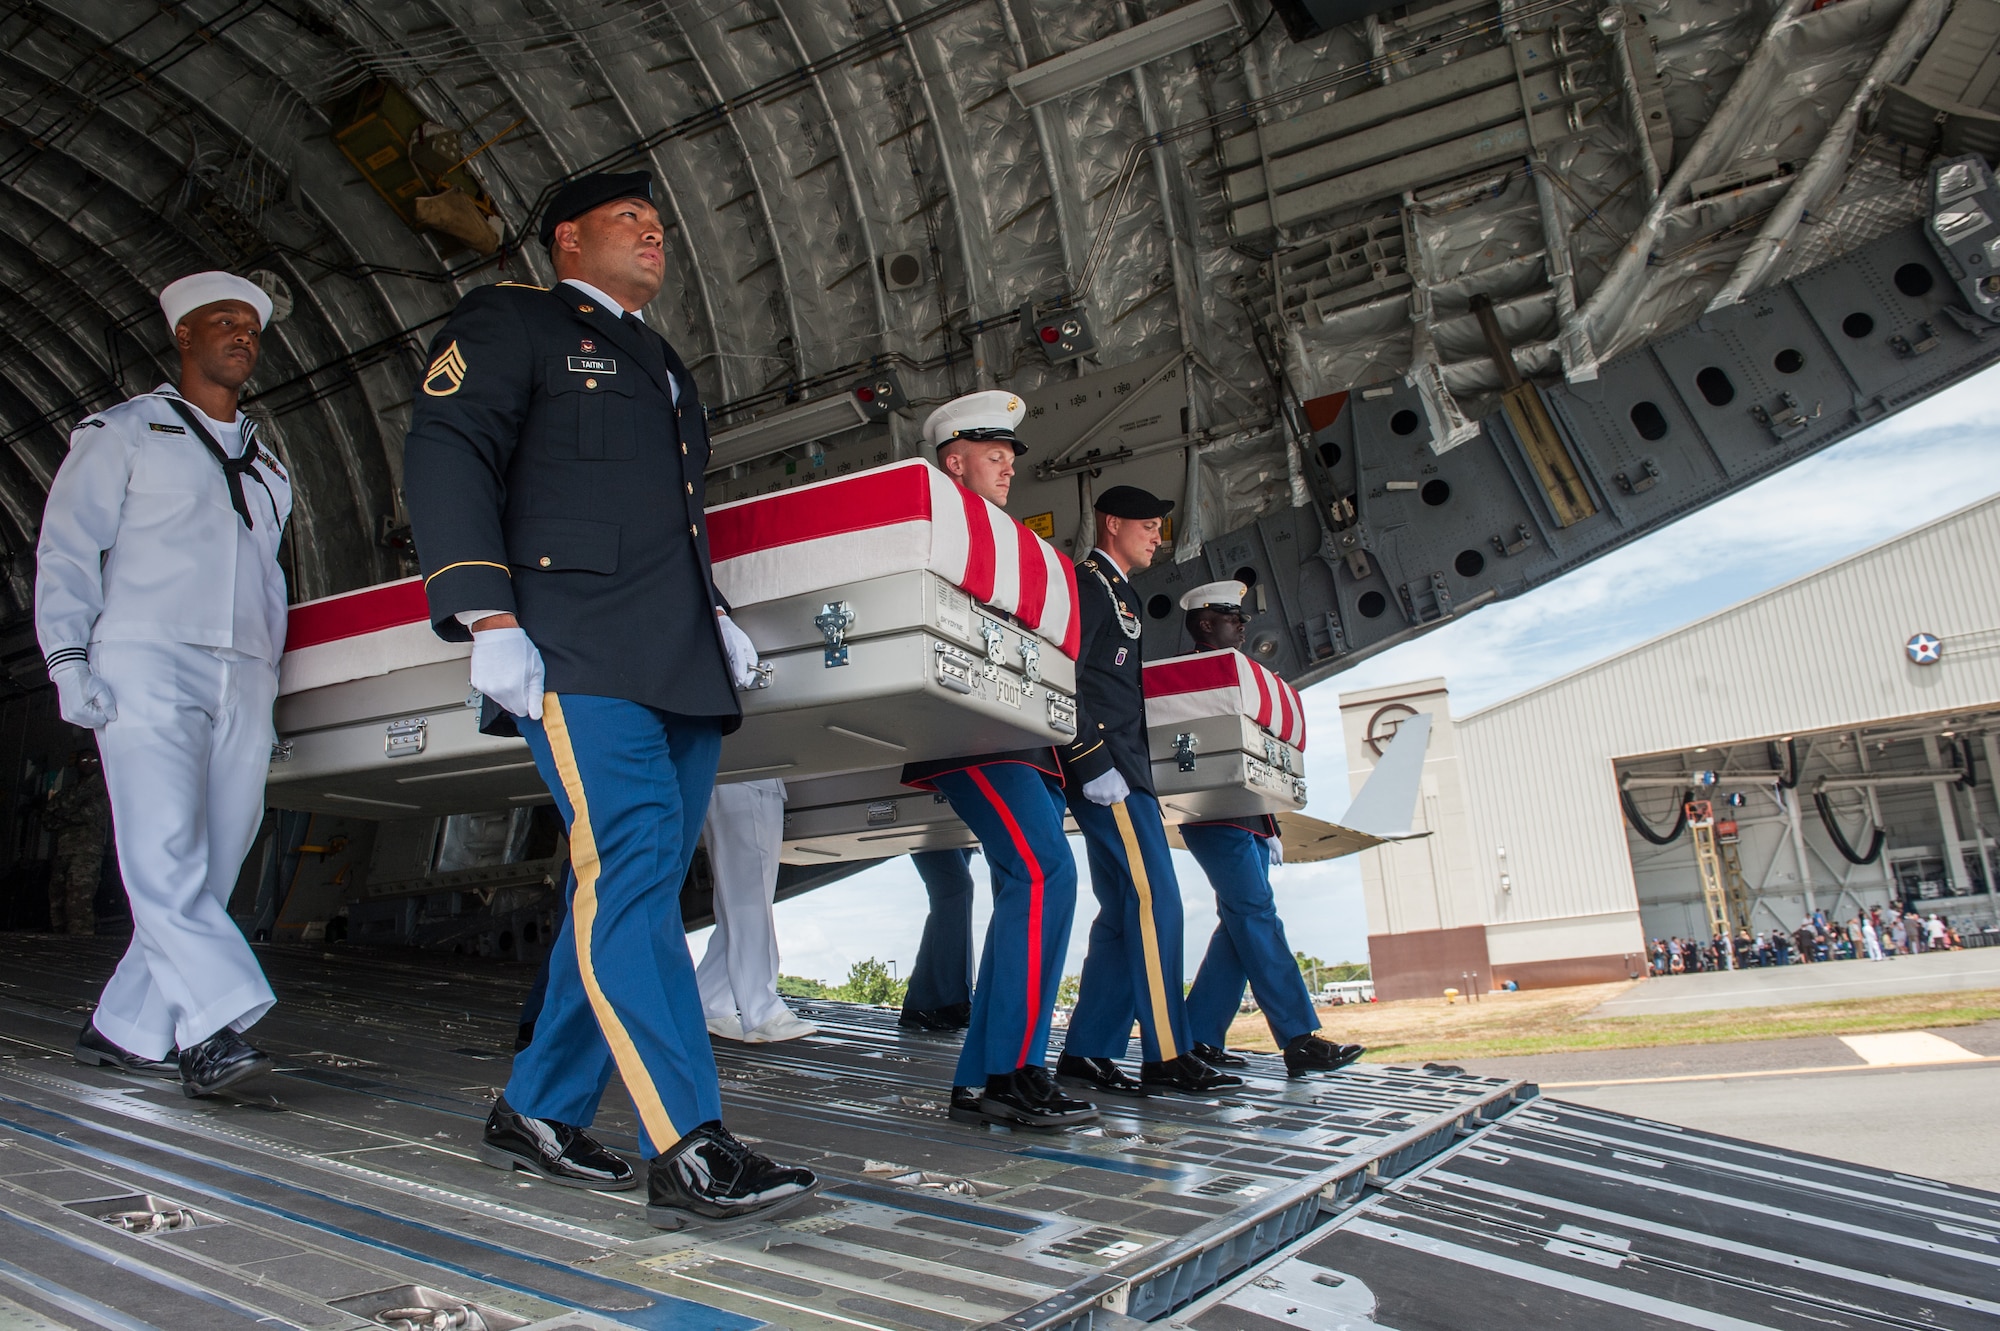 The United Nations Command recently repatriated 55 transfer cases from North Korea that contain what are believed to be the remains of American service members lost in the Korean War.